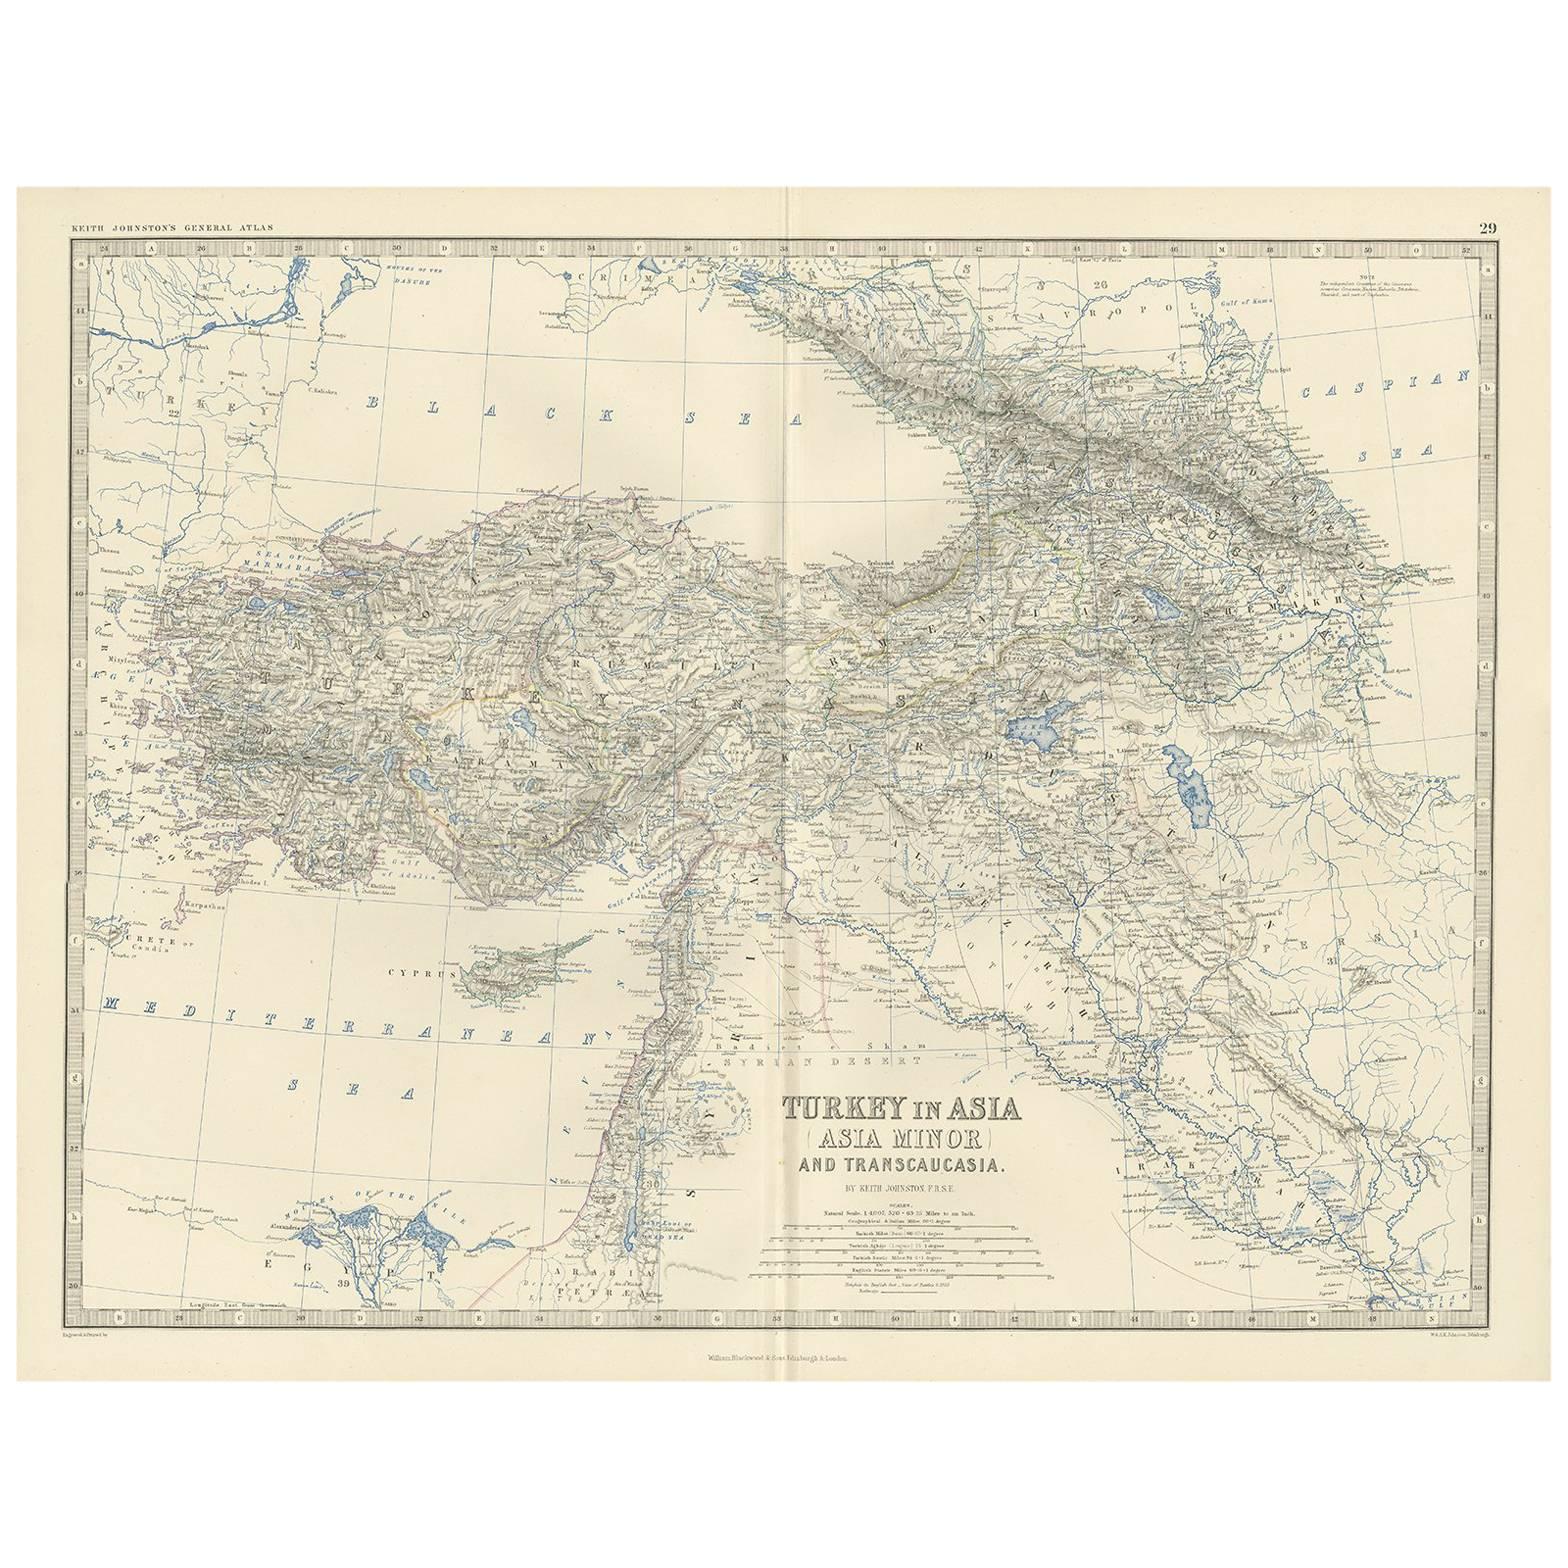 Antique Map of Turkey in Asia by A.K. Johnston, 1865